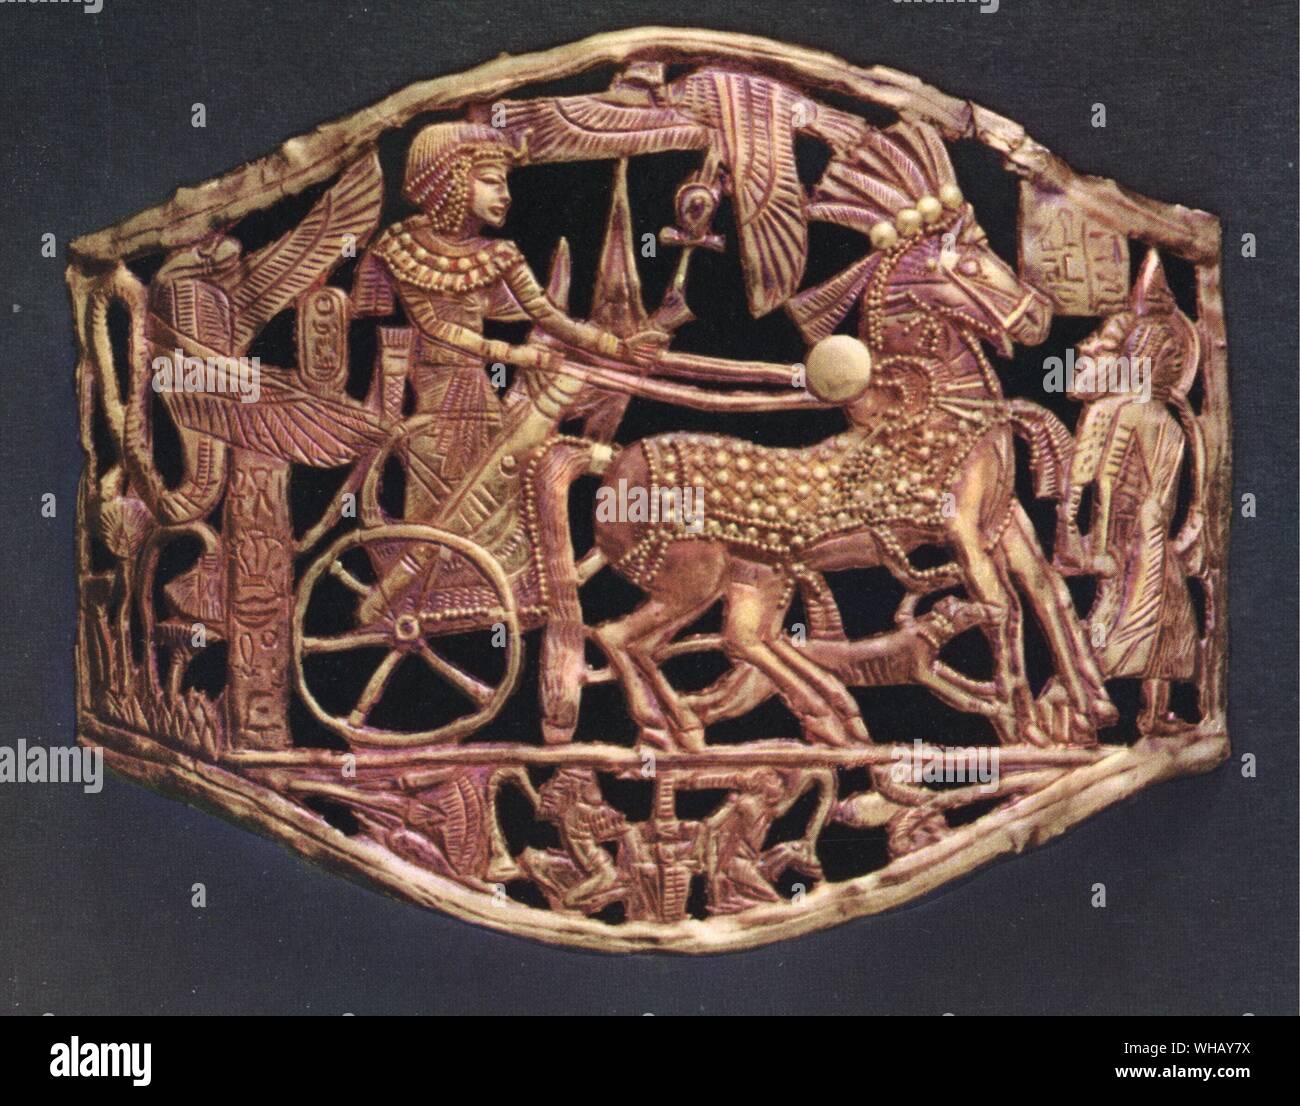 Object in red gold openwork showing the king's triumphant return with prisoners. Tukankhamen, by Christiane Desroches Noblecourt, page 98.. The Egyptian symbol for gold is a collar with beads along the lower edge. Gold has long been associated with the gods and royalty. This imperishable metal reflects the brilliance of the sun and the hope of eternal life. . In the shape of a mirror or a knot, the ankh is a symbol of life. It was often carried by deities or people in a funeral procession, or offered to the king as the breath of life. Here, the Ankh is carried by the vulture top centre.. . . . Stock Photo